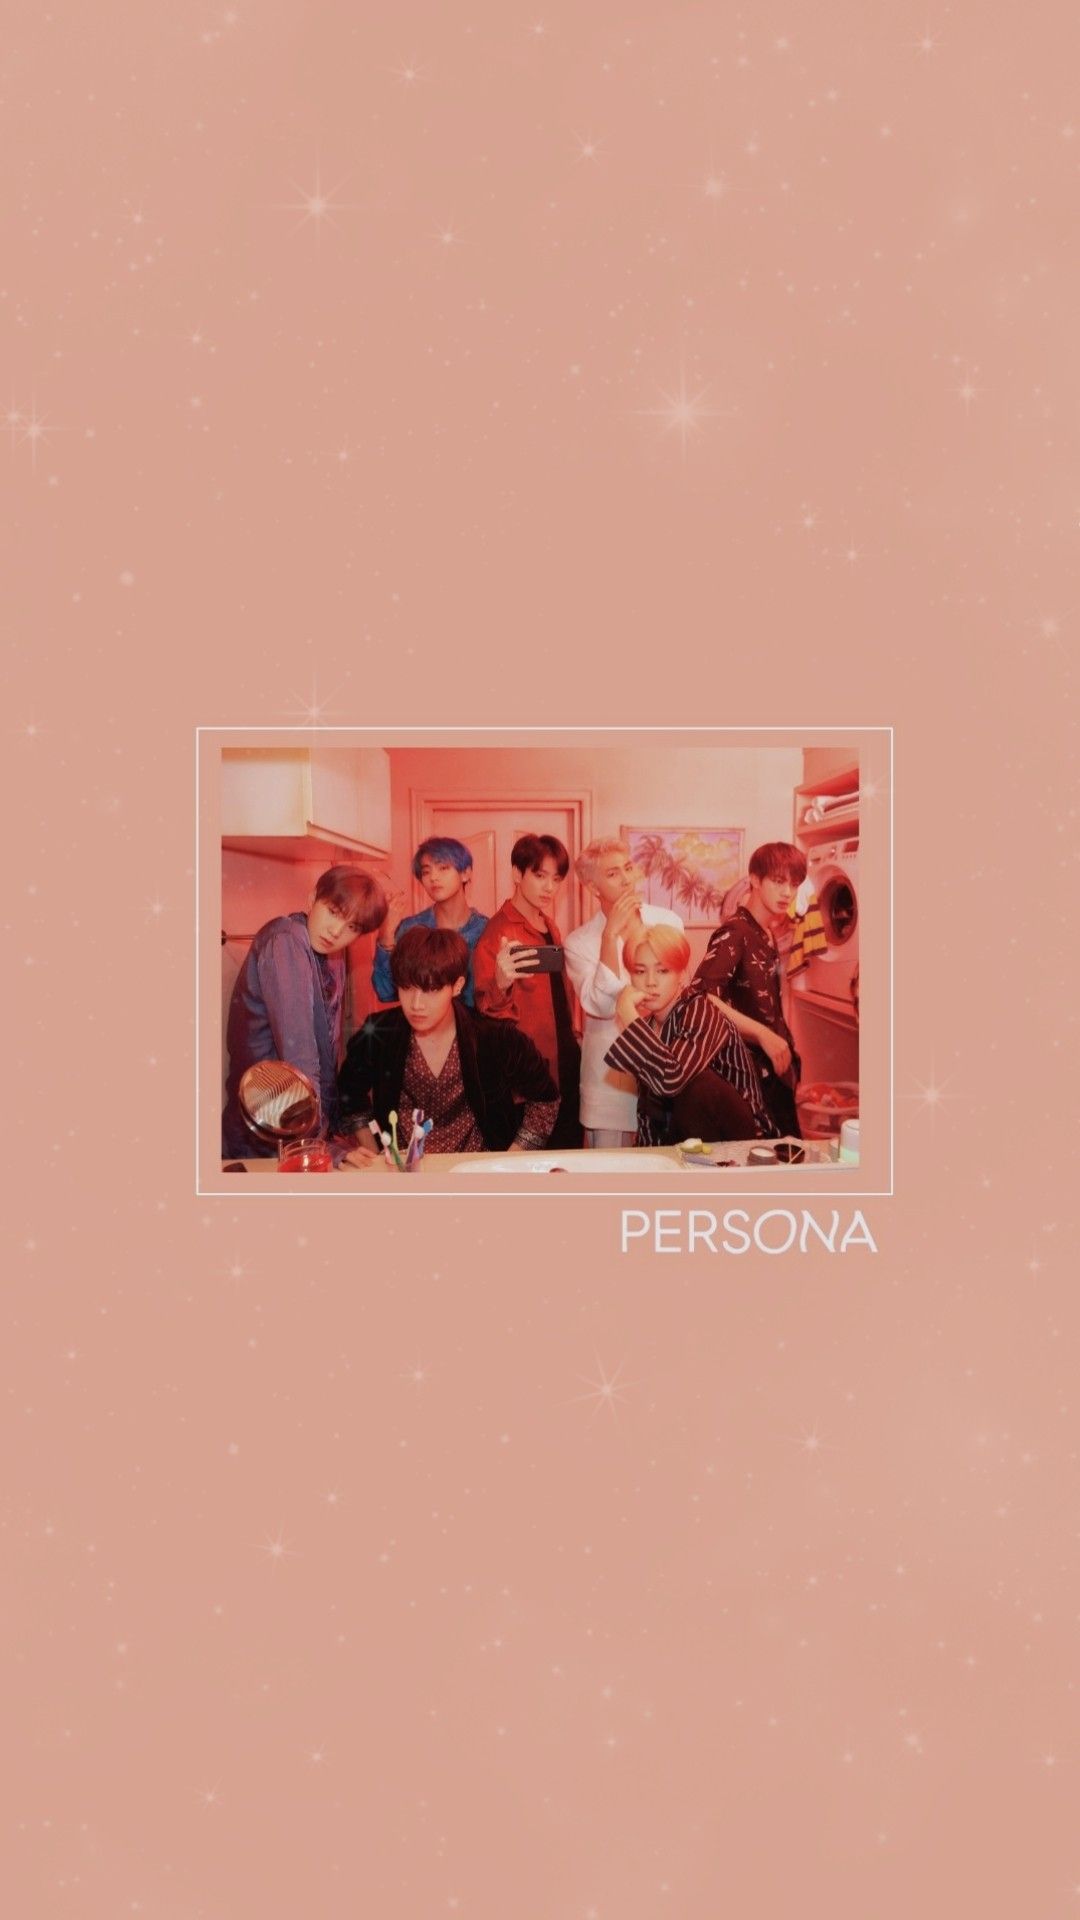 Bts Persona wallpaper I made for my phone! - BTS